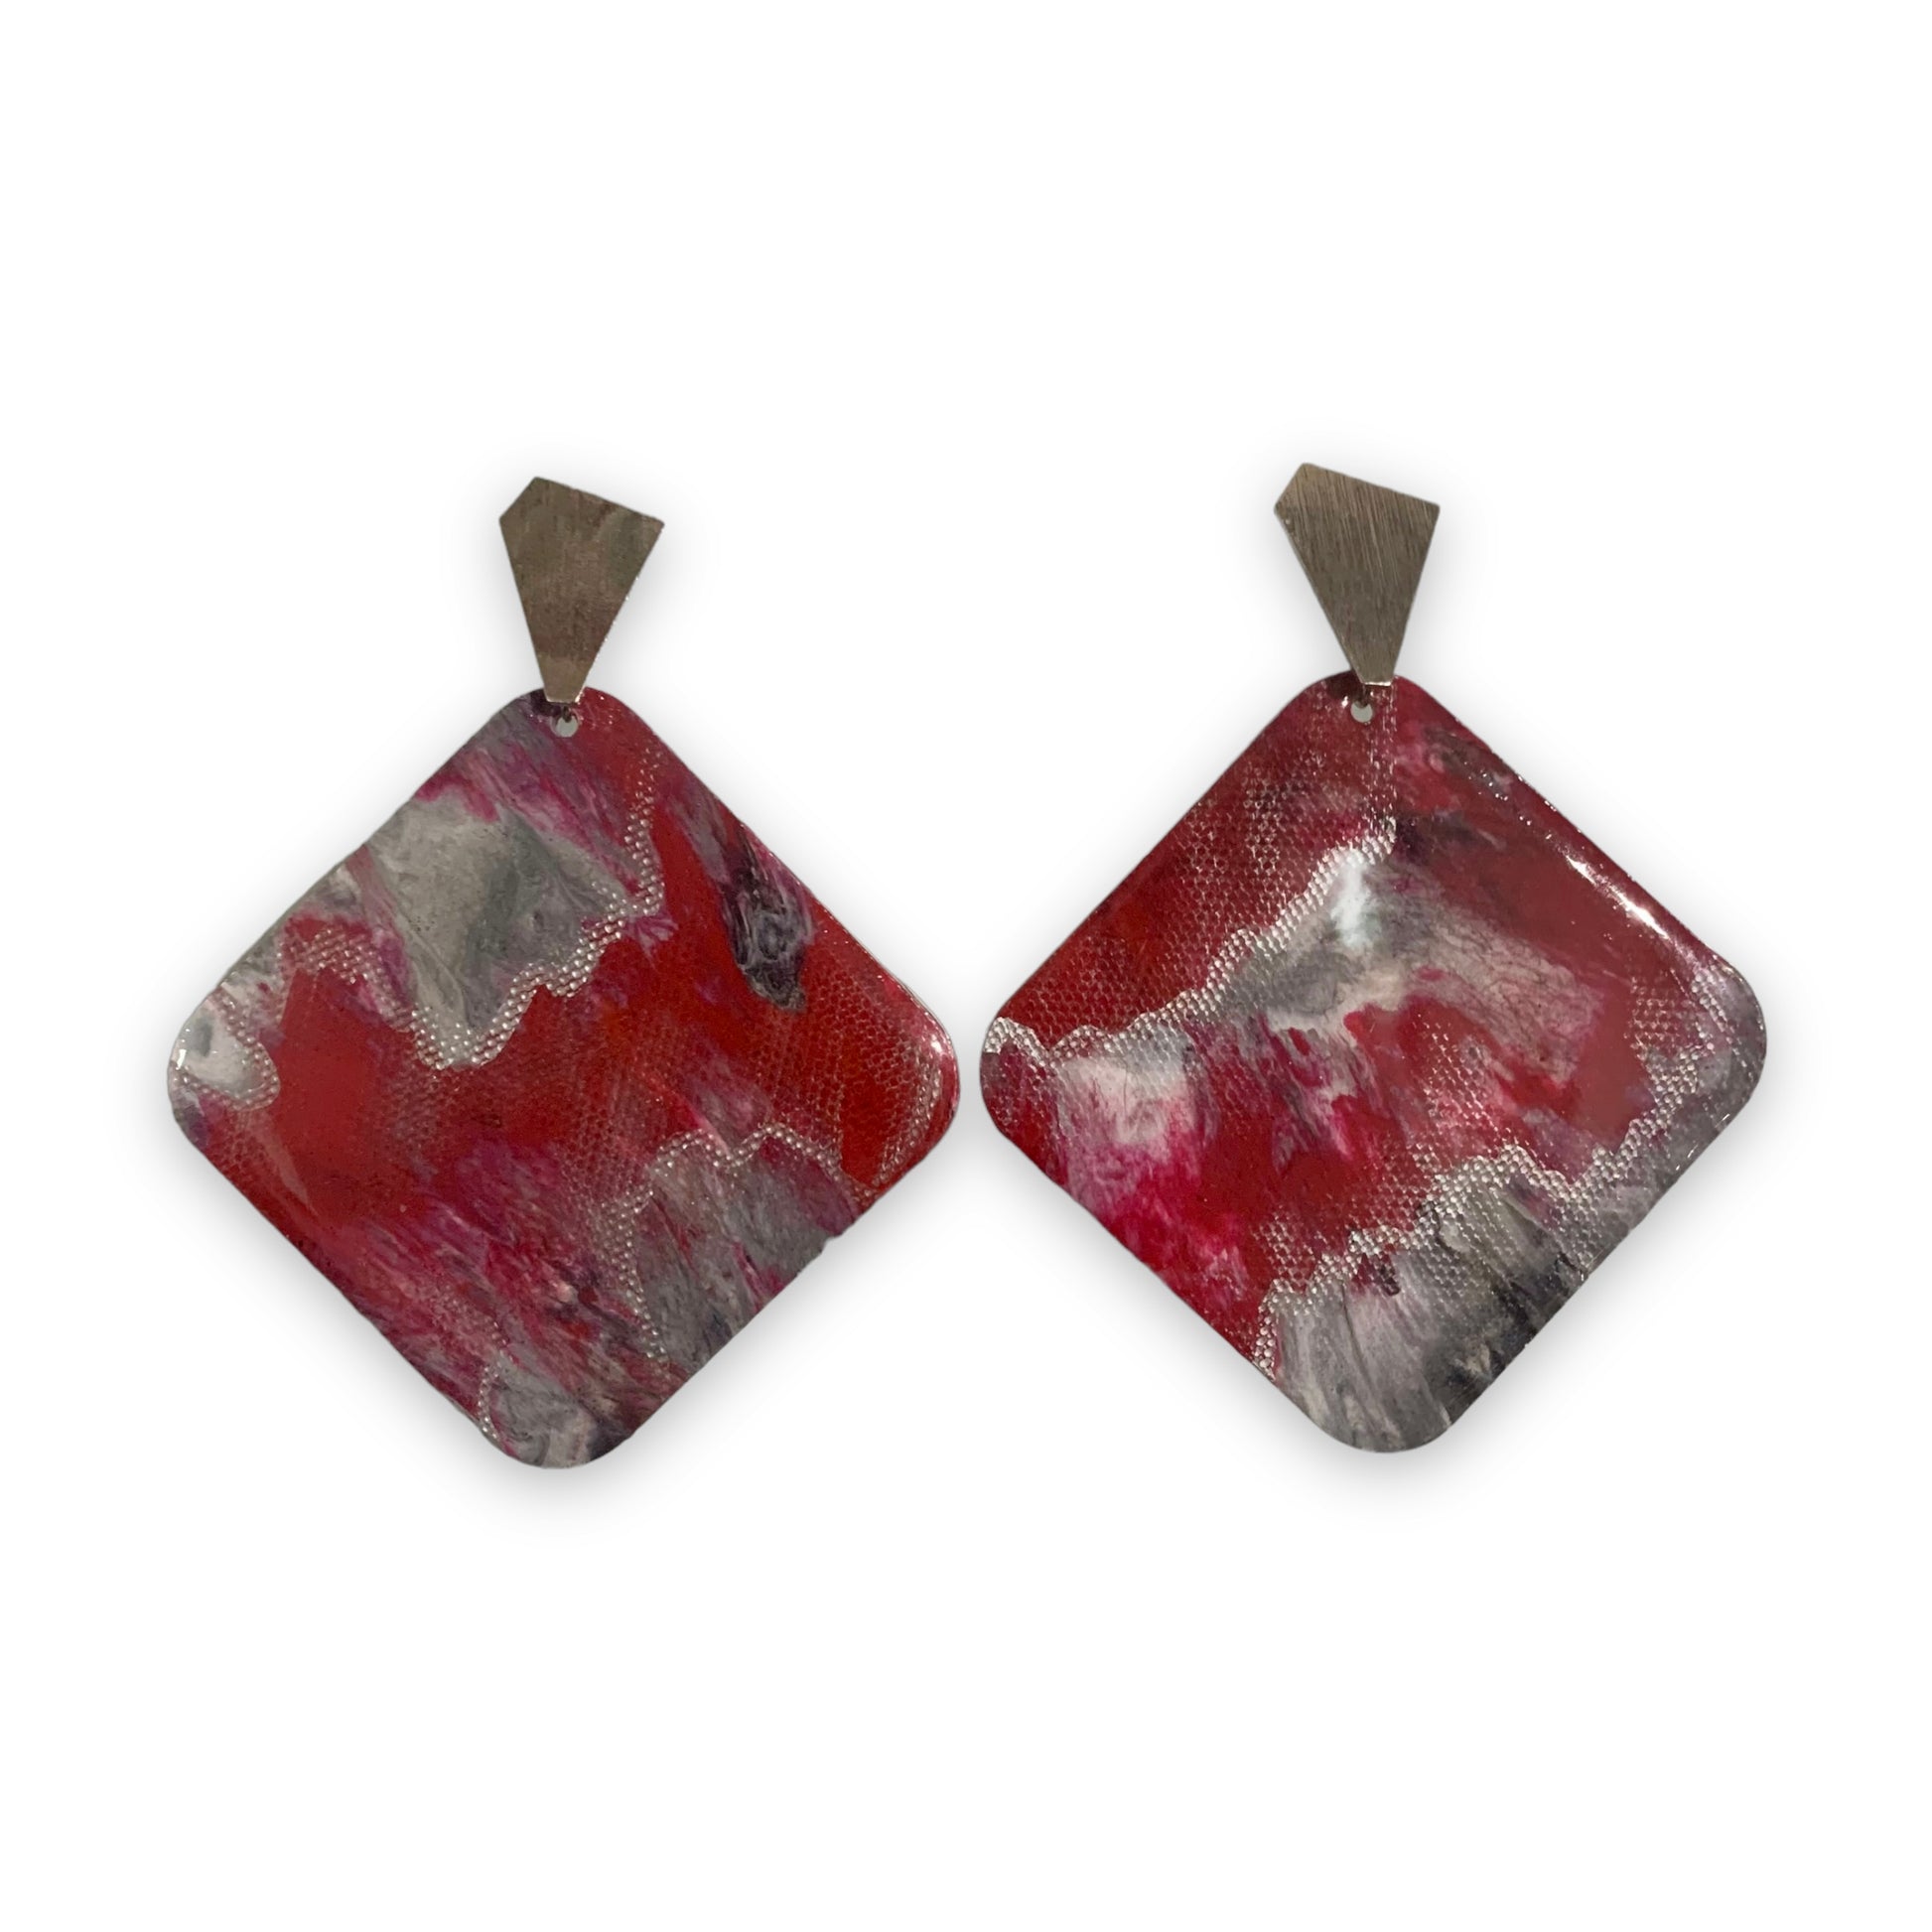 Red Silver Square Statement Earrings Studs Recycled Plastic Bottle tops Handmade Hand Crafted Ethically Made Shop small Eco lovers 